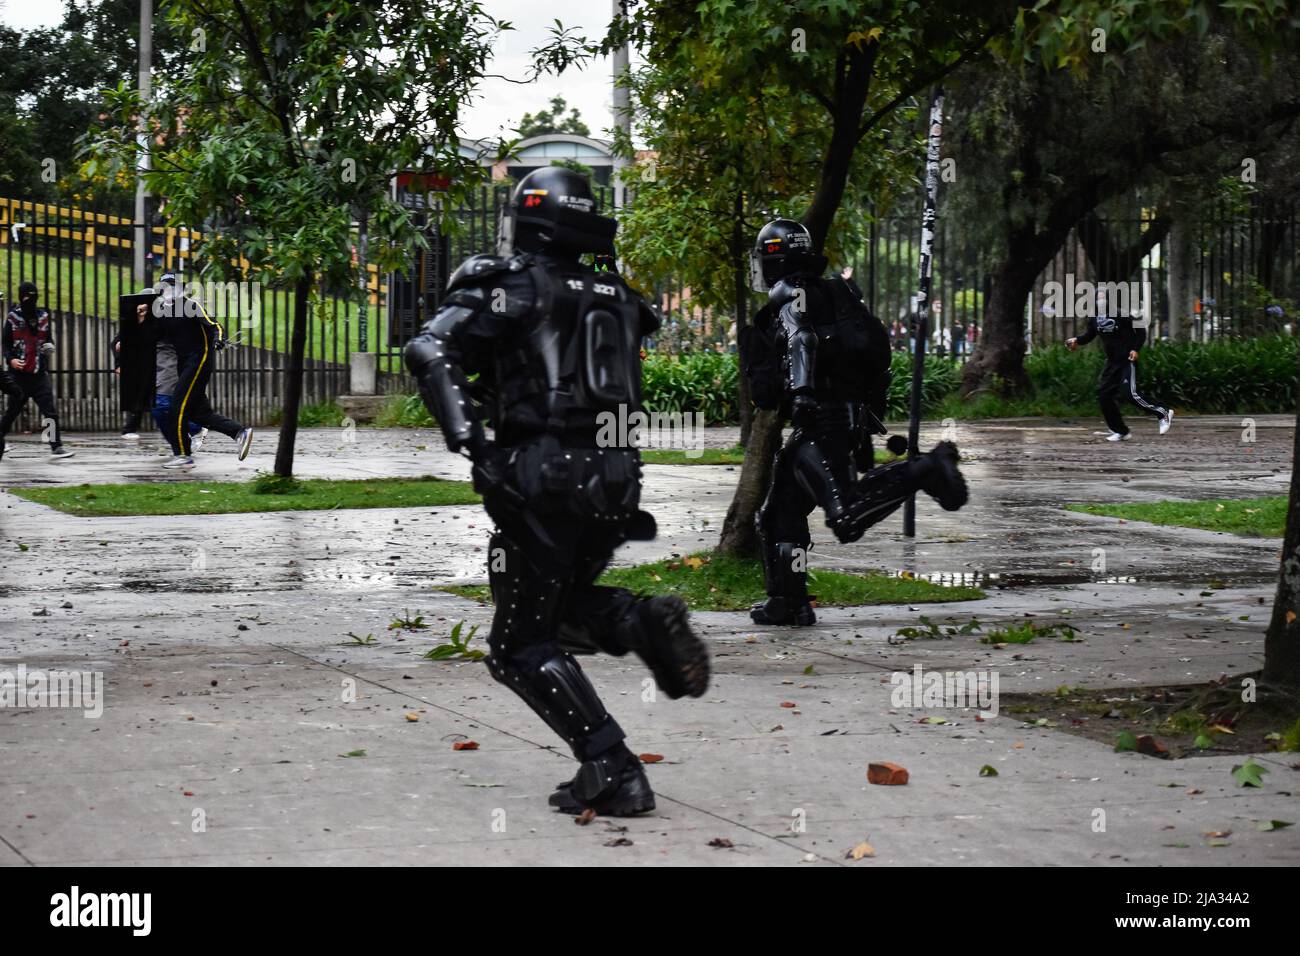 Demonstrations and clashes take place at 'Universidad Nacional de Colombia' between demonstrators and Colombia's anti-riot police 'ESMAD' in Bogota, Colombia on May 26, 2022. Photo by: Cristian Bayona/Long Visual Press Stock Photo